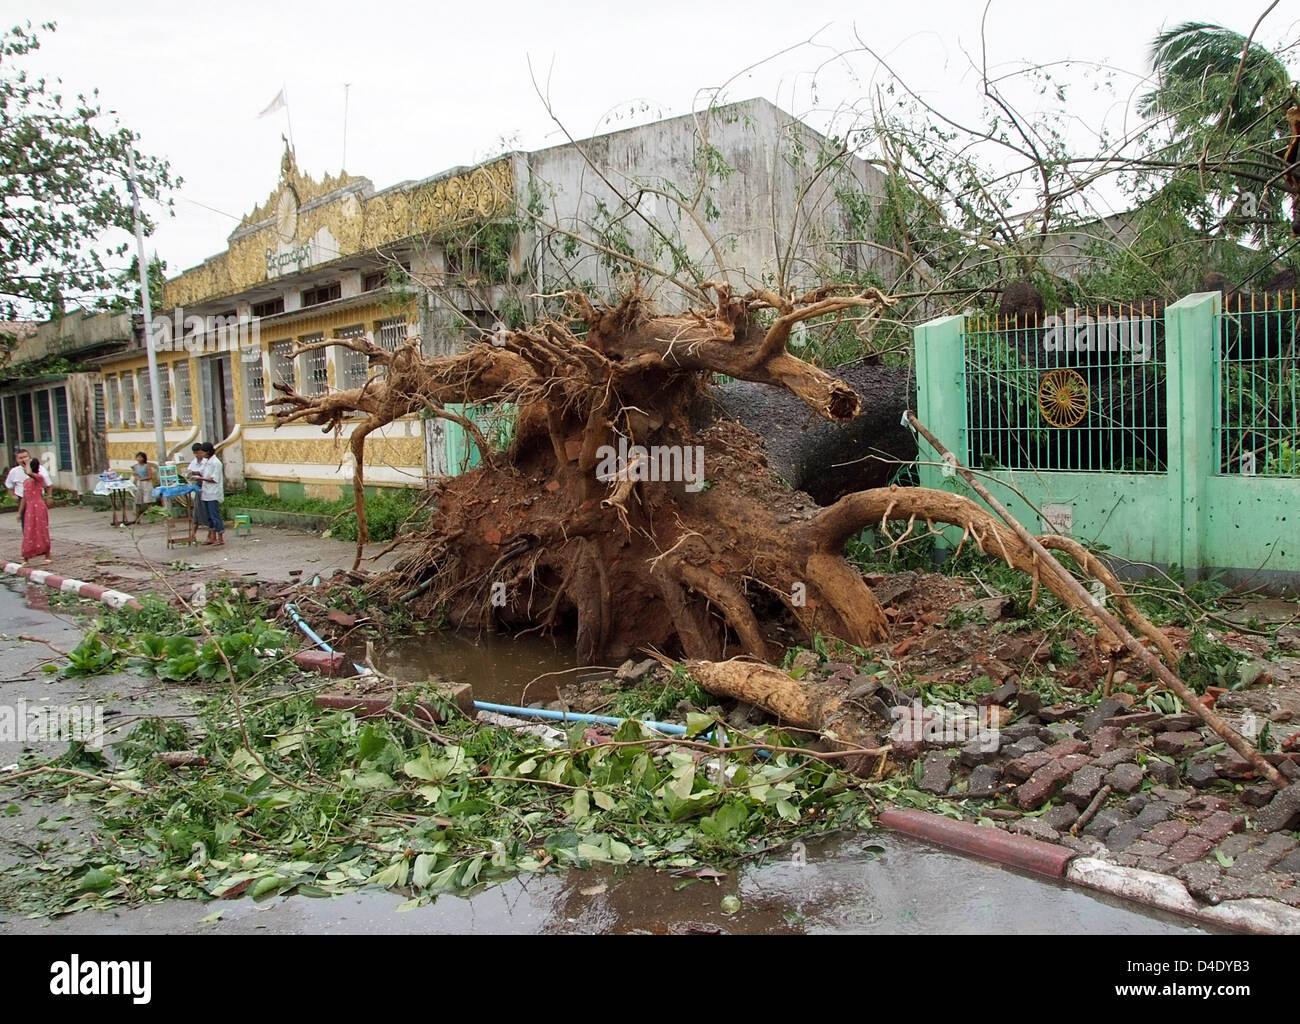 A fallen tree on a street in Yangon, Myanmar, 5 May 2008. International aid has begun after devastating cyclone 'Nargis' hit Myanmar, though the exact situation in the country, which is isolated from the outside world by the military junta, remains unclear. Most traffic routes are blocked, Myanmar's government assumes that more than 15,000 people were killed and hundreds of thousan Stock Photo